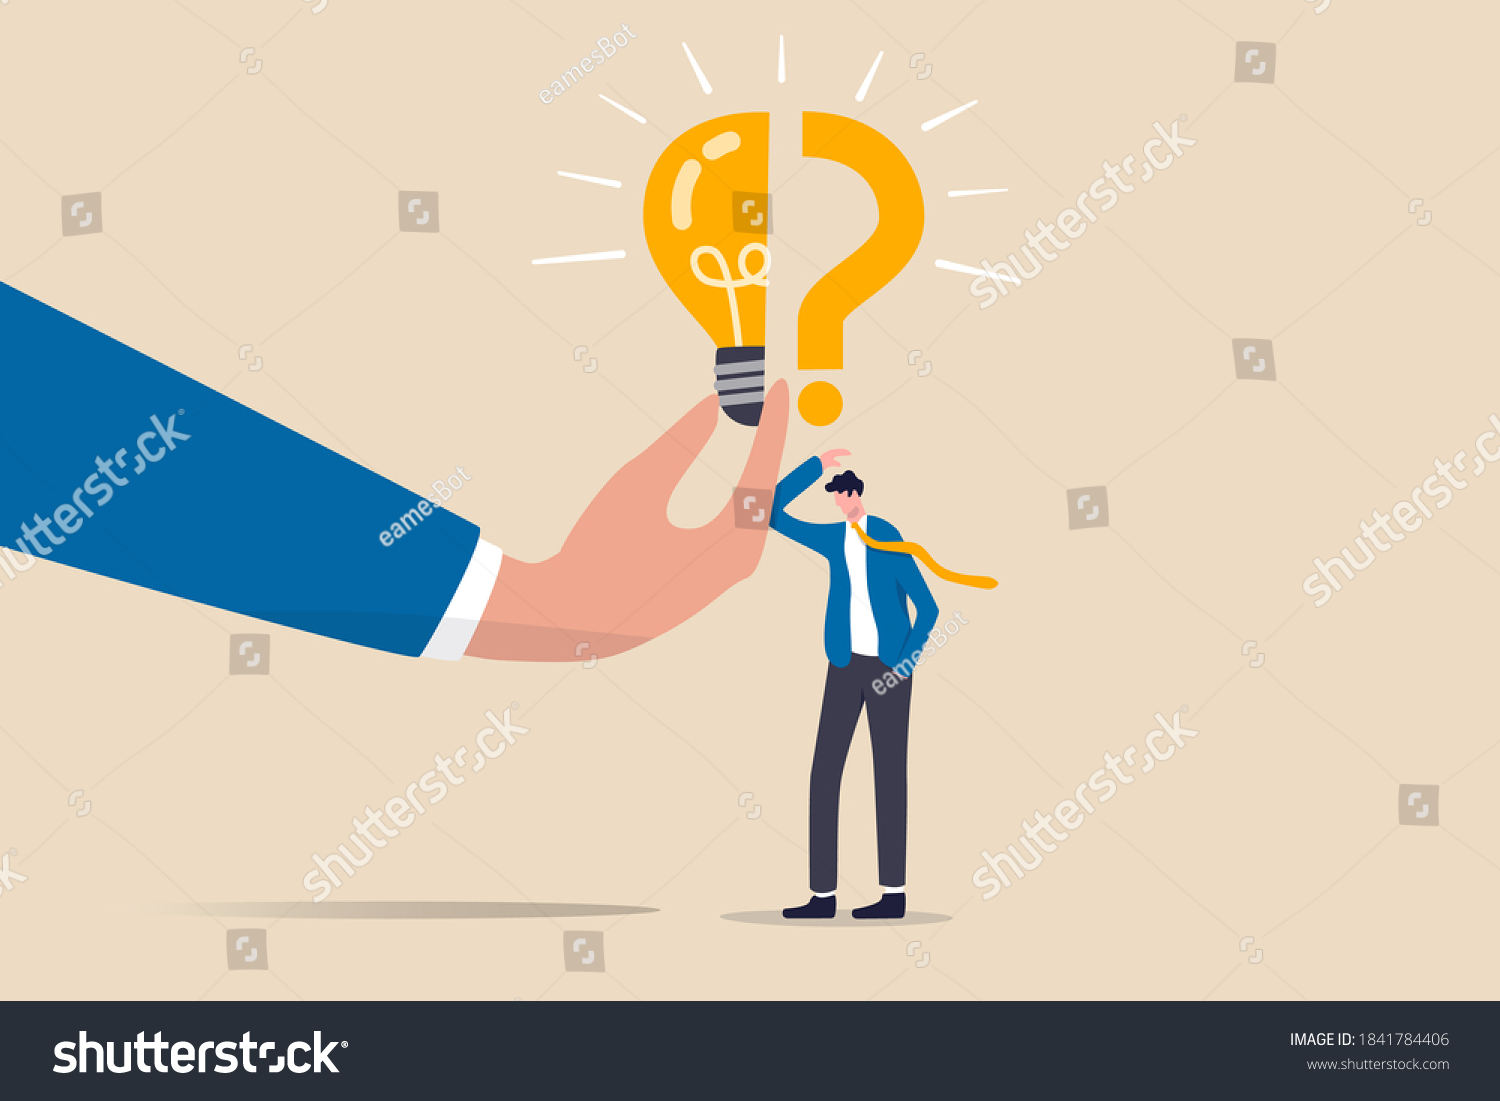 Business problem, idea, decision making and solution, job and career path concept, confusing businessman stand with question mark sign then helping hand put half of lightbulb lamp for bright solution. #1841784406